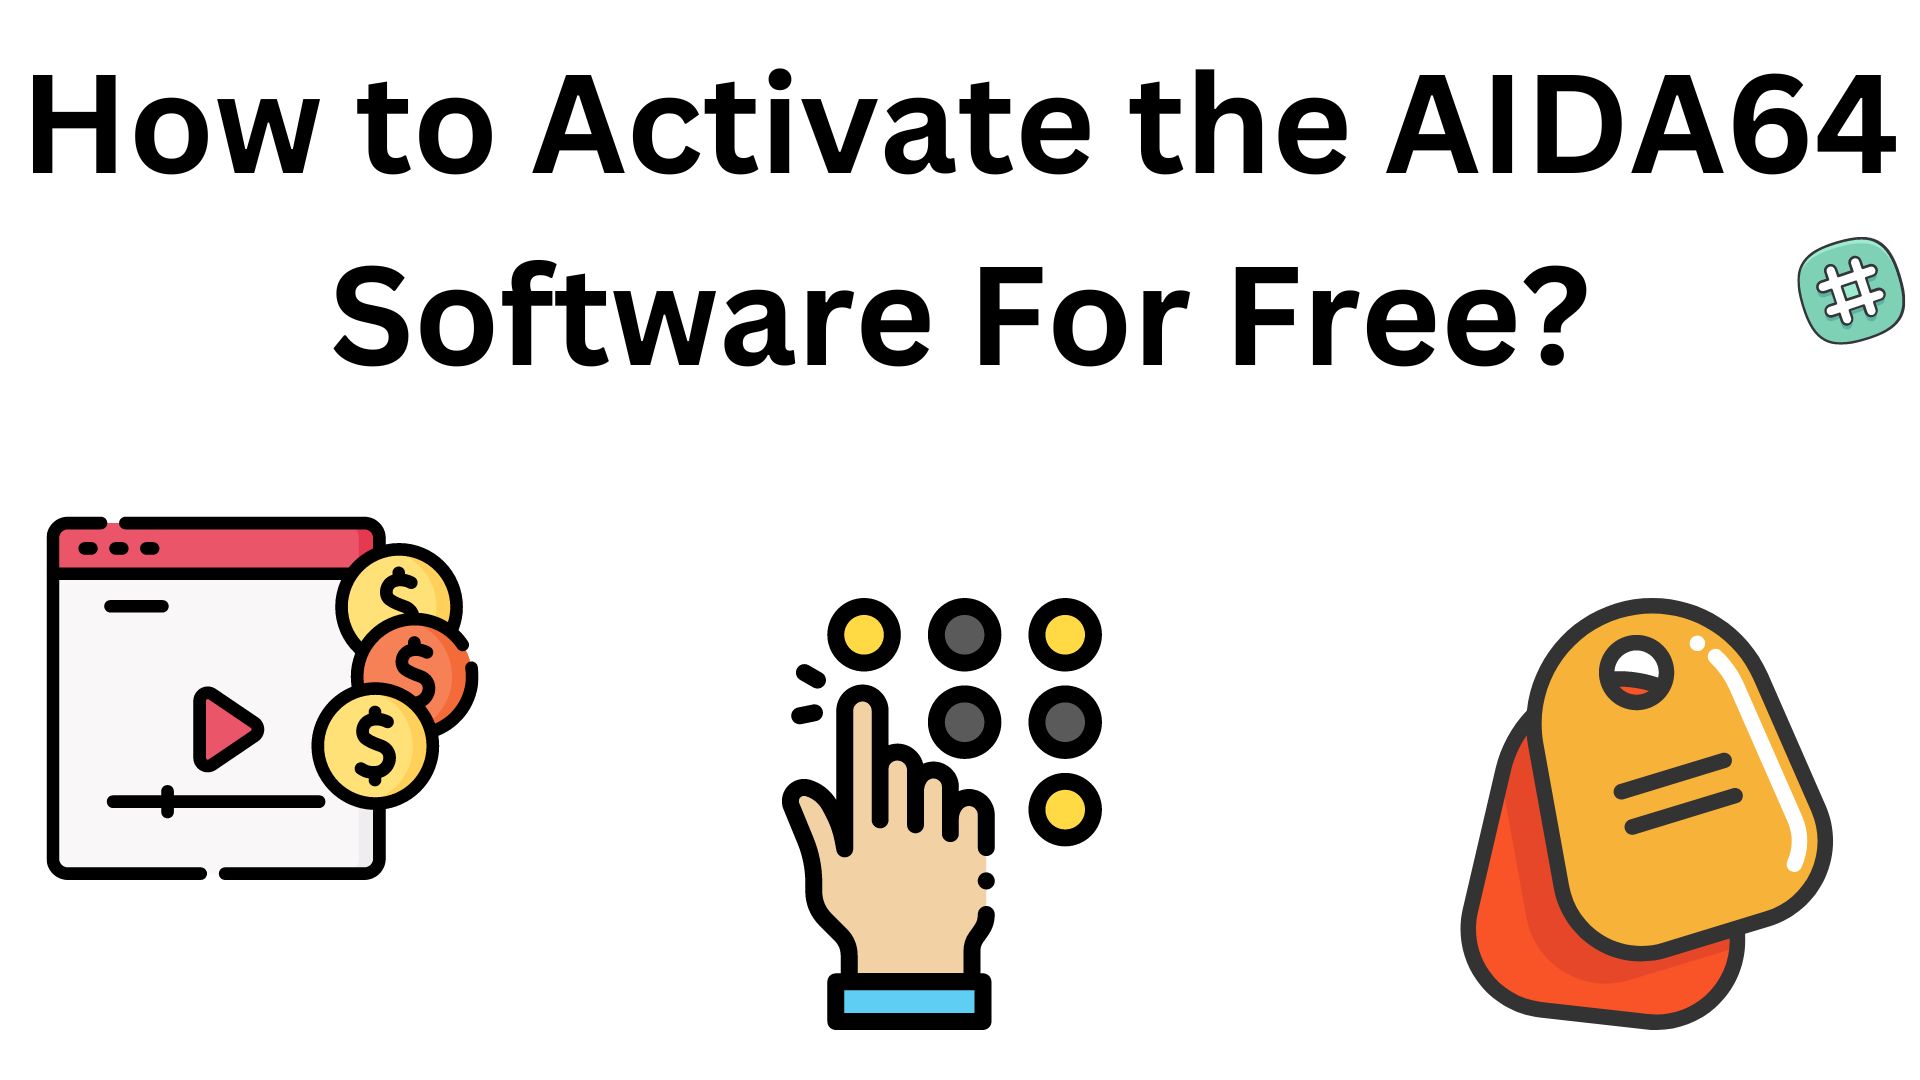 How To Activate The Aida64 Software For Free?